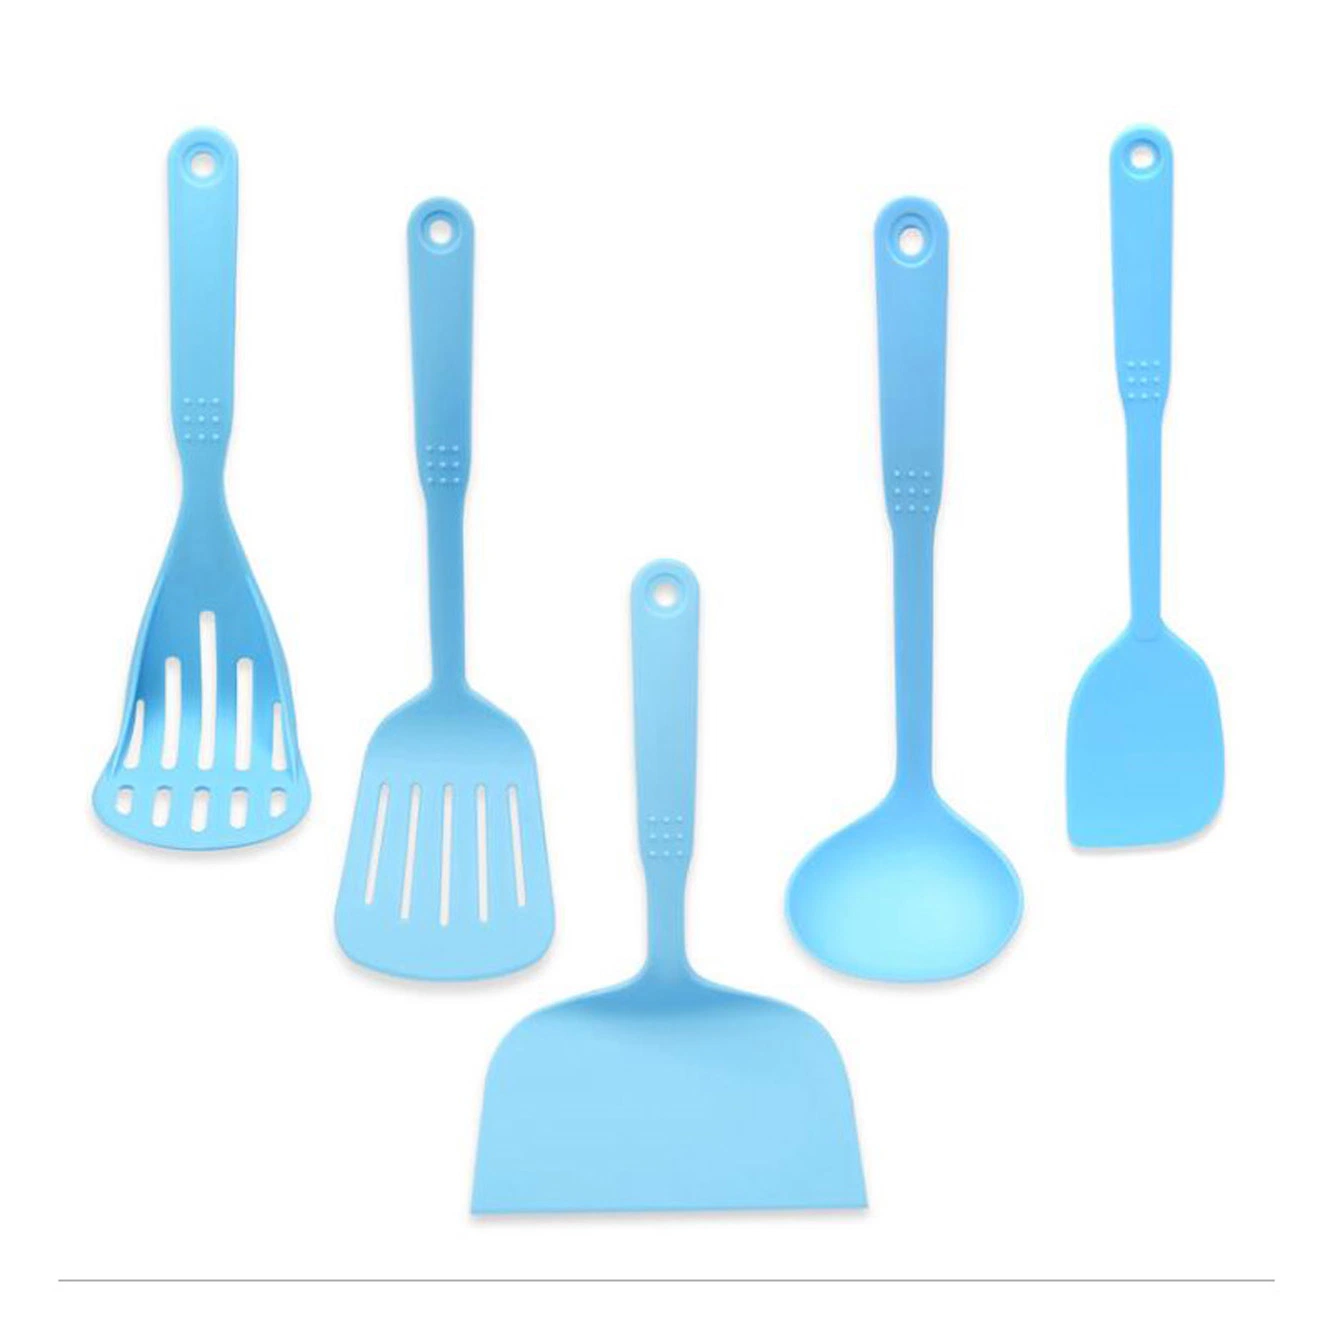 Non Stick Heat Resistant Nylon Cooking Utensil Set of 5 Includes Slotted Turner, Fish Spatulas, Serving Spoon, Spatulas and Musher Esg12003